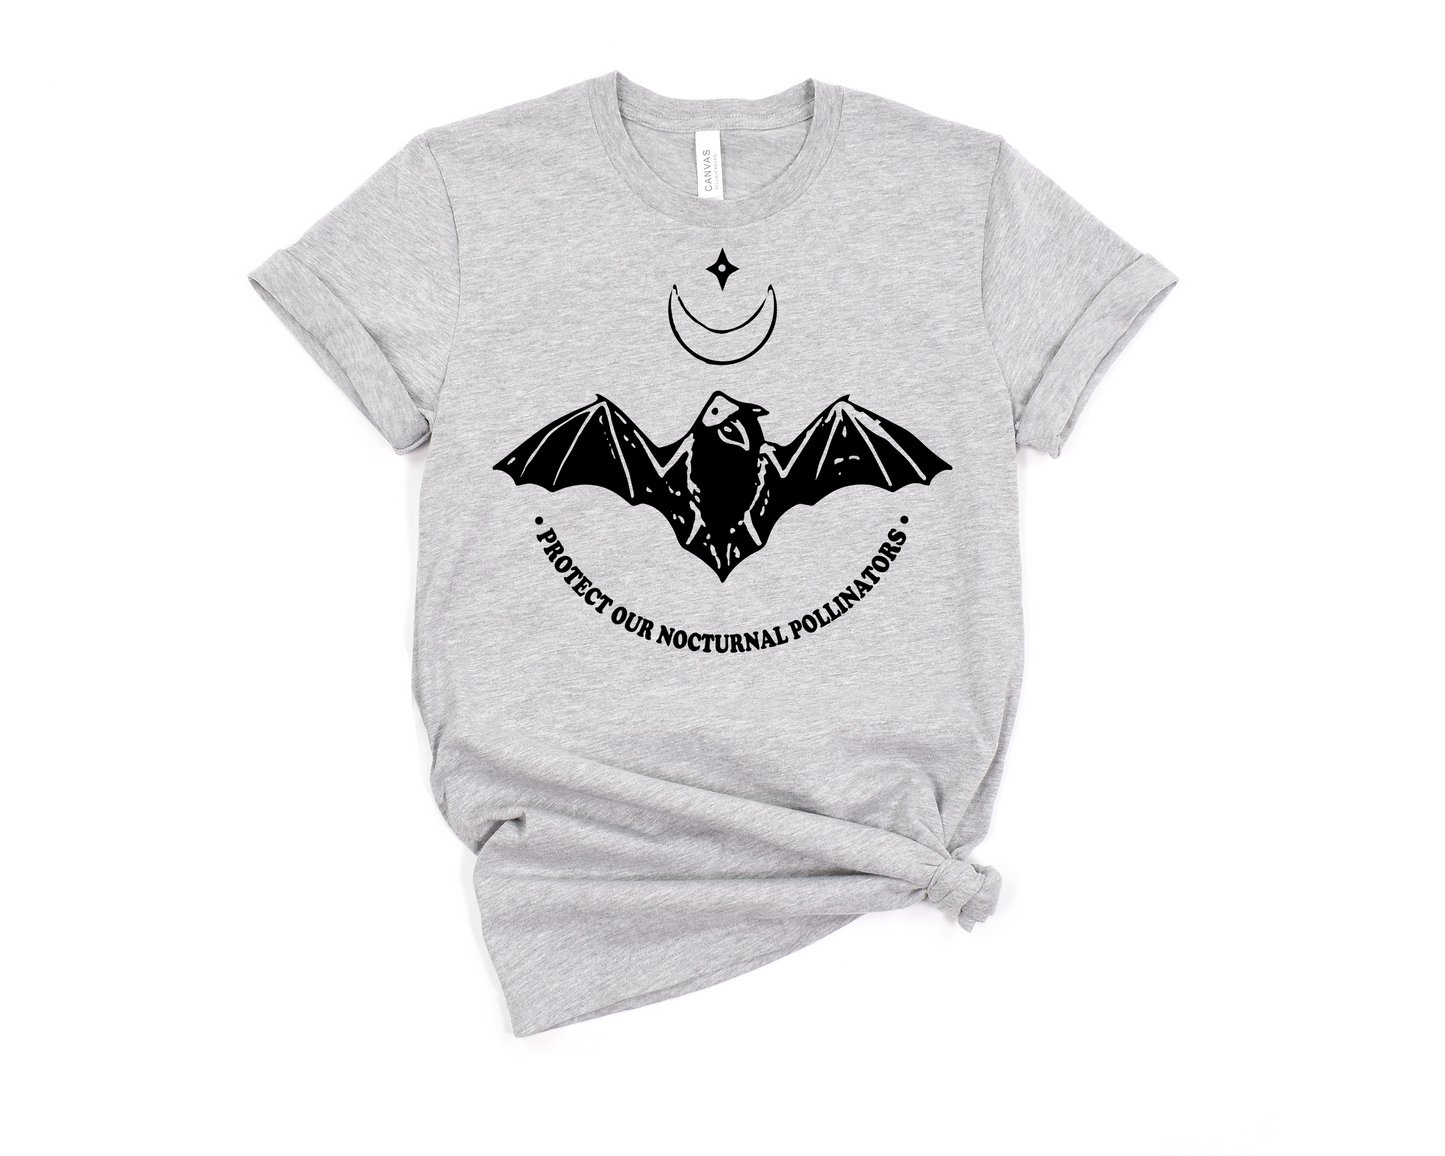 Protect Our Nocturnal Pollinators T-Shirt